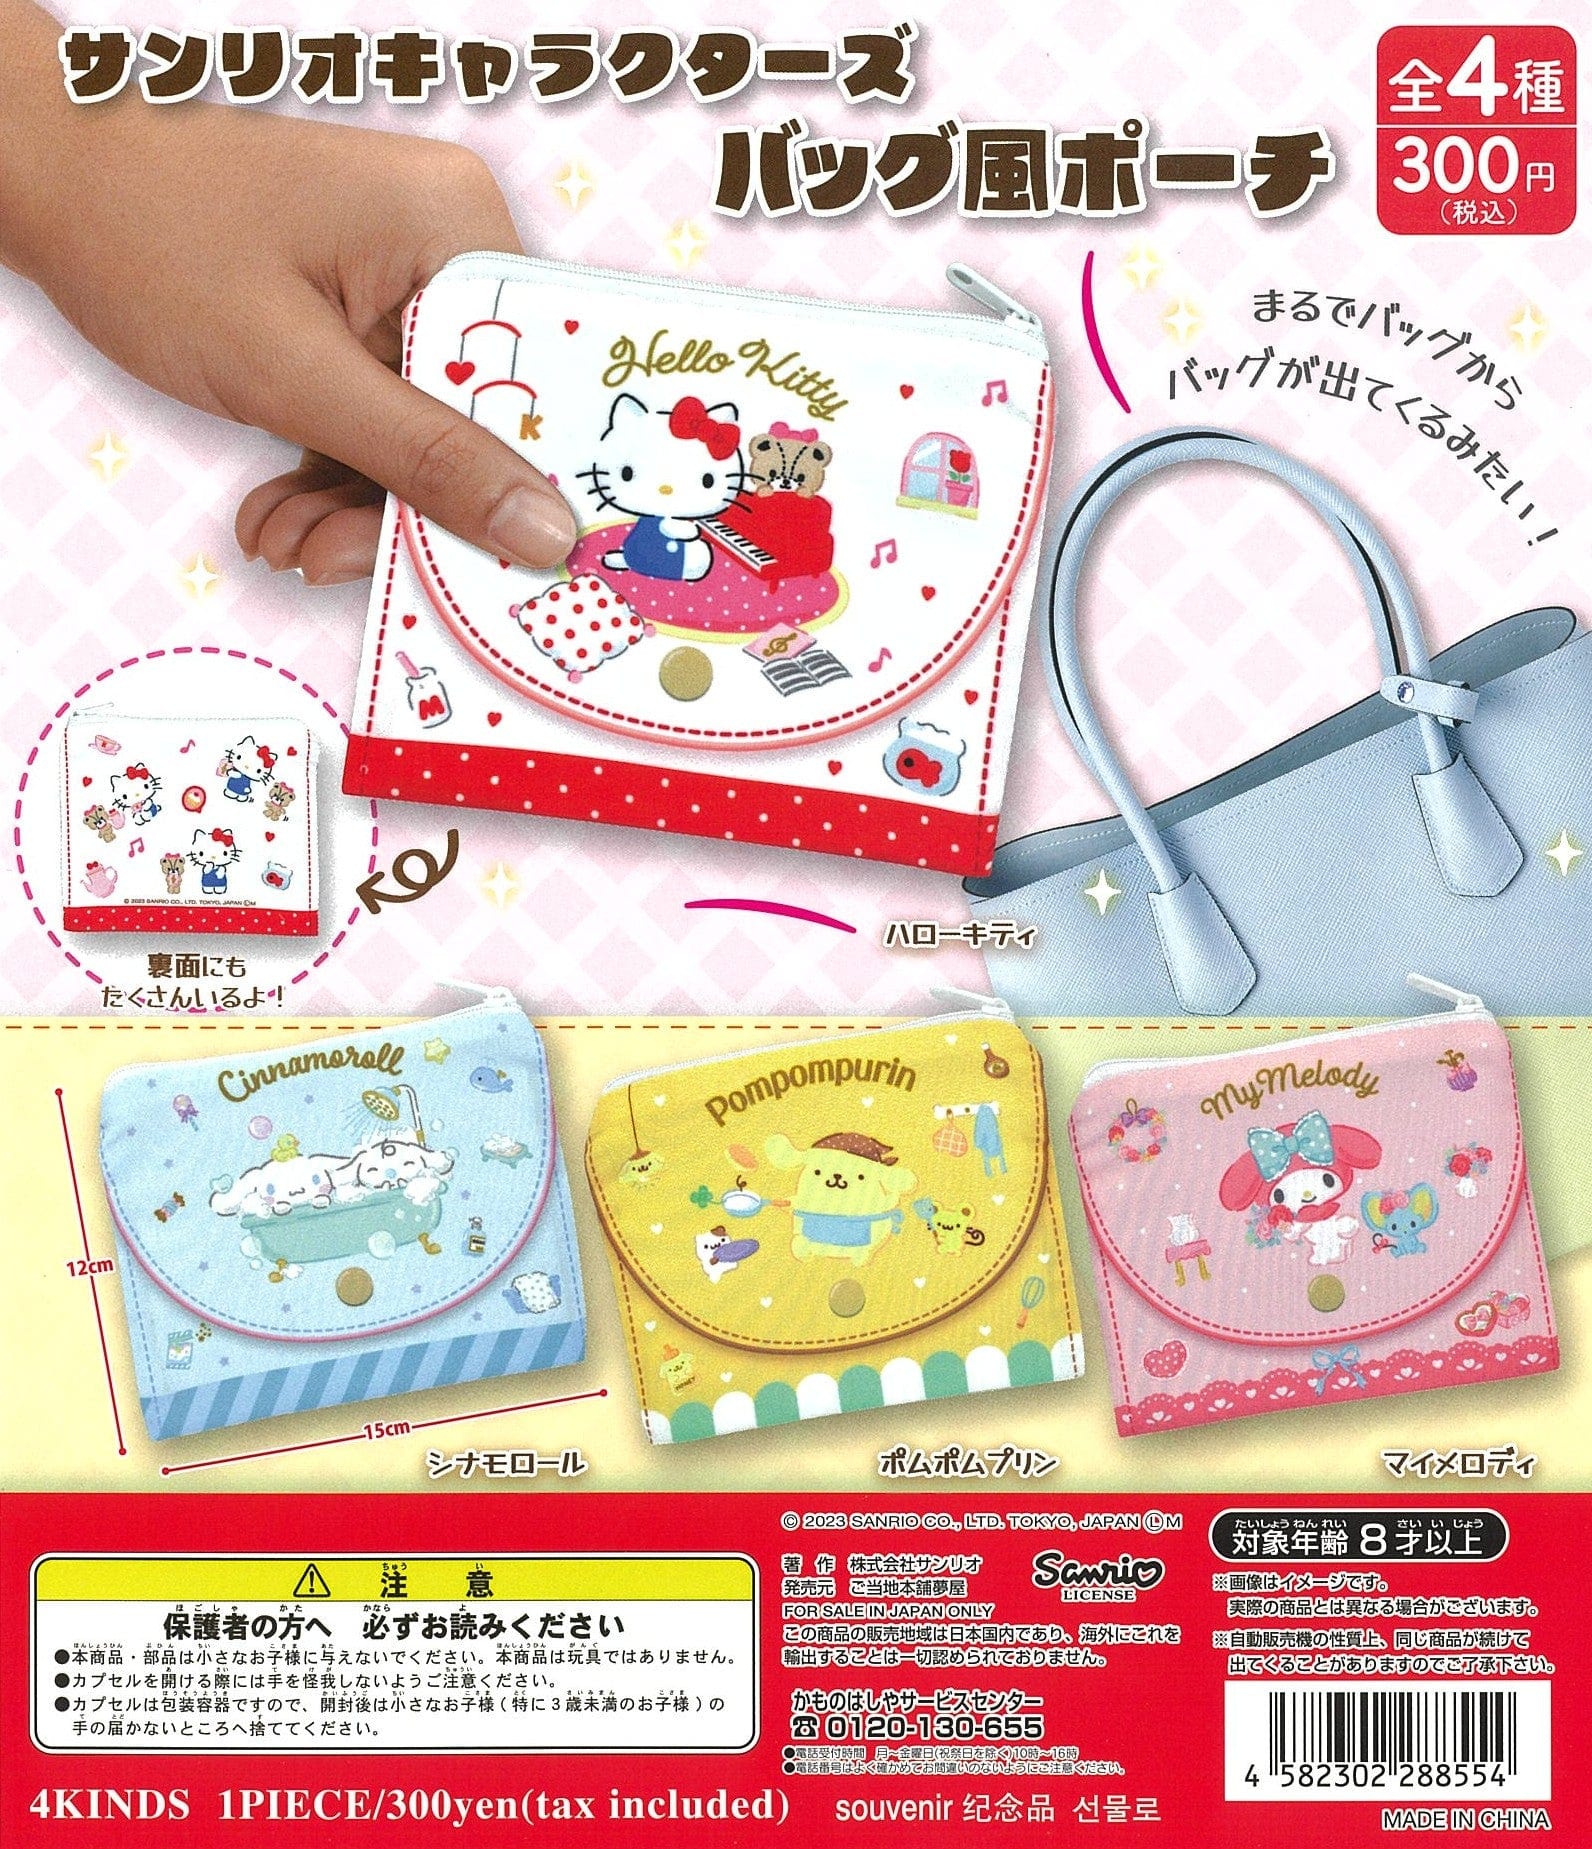 Sanrio CP2366 Sanrio Characters Bag Style Pouch